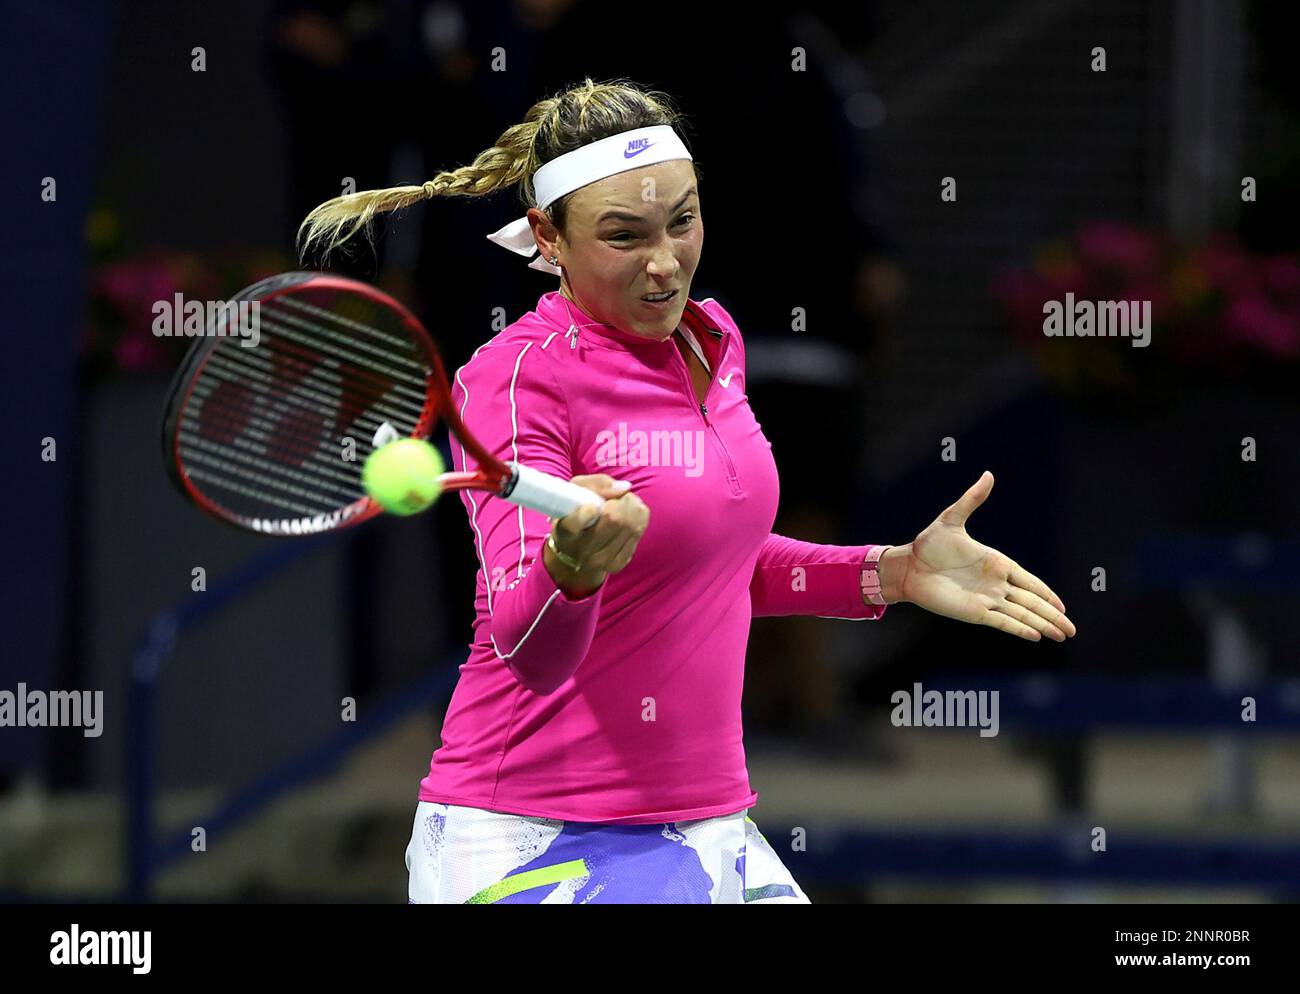 Donna Vekic in action against Kristyna Pliskova during a Womens Singles match at the 2020 US Open, Tuesday, Sept